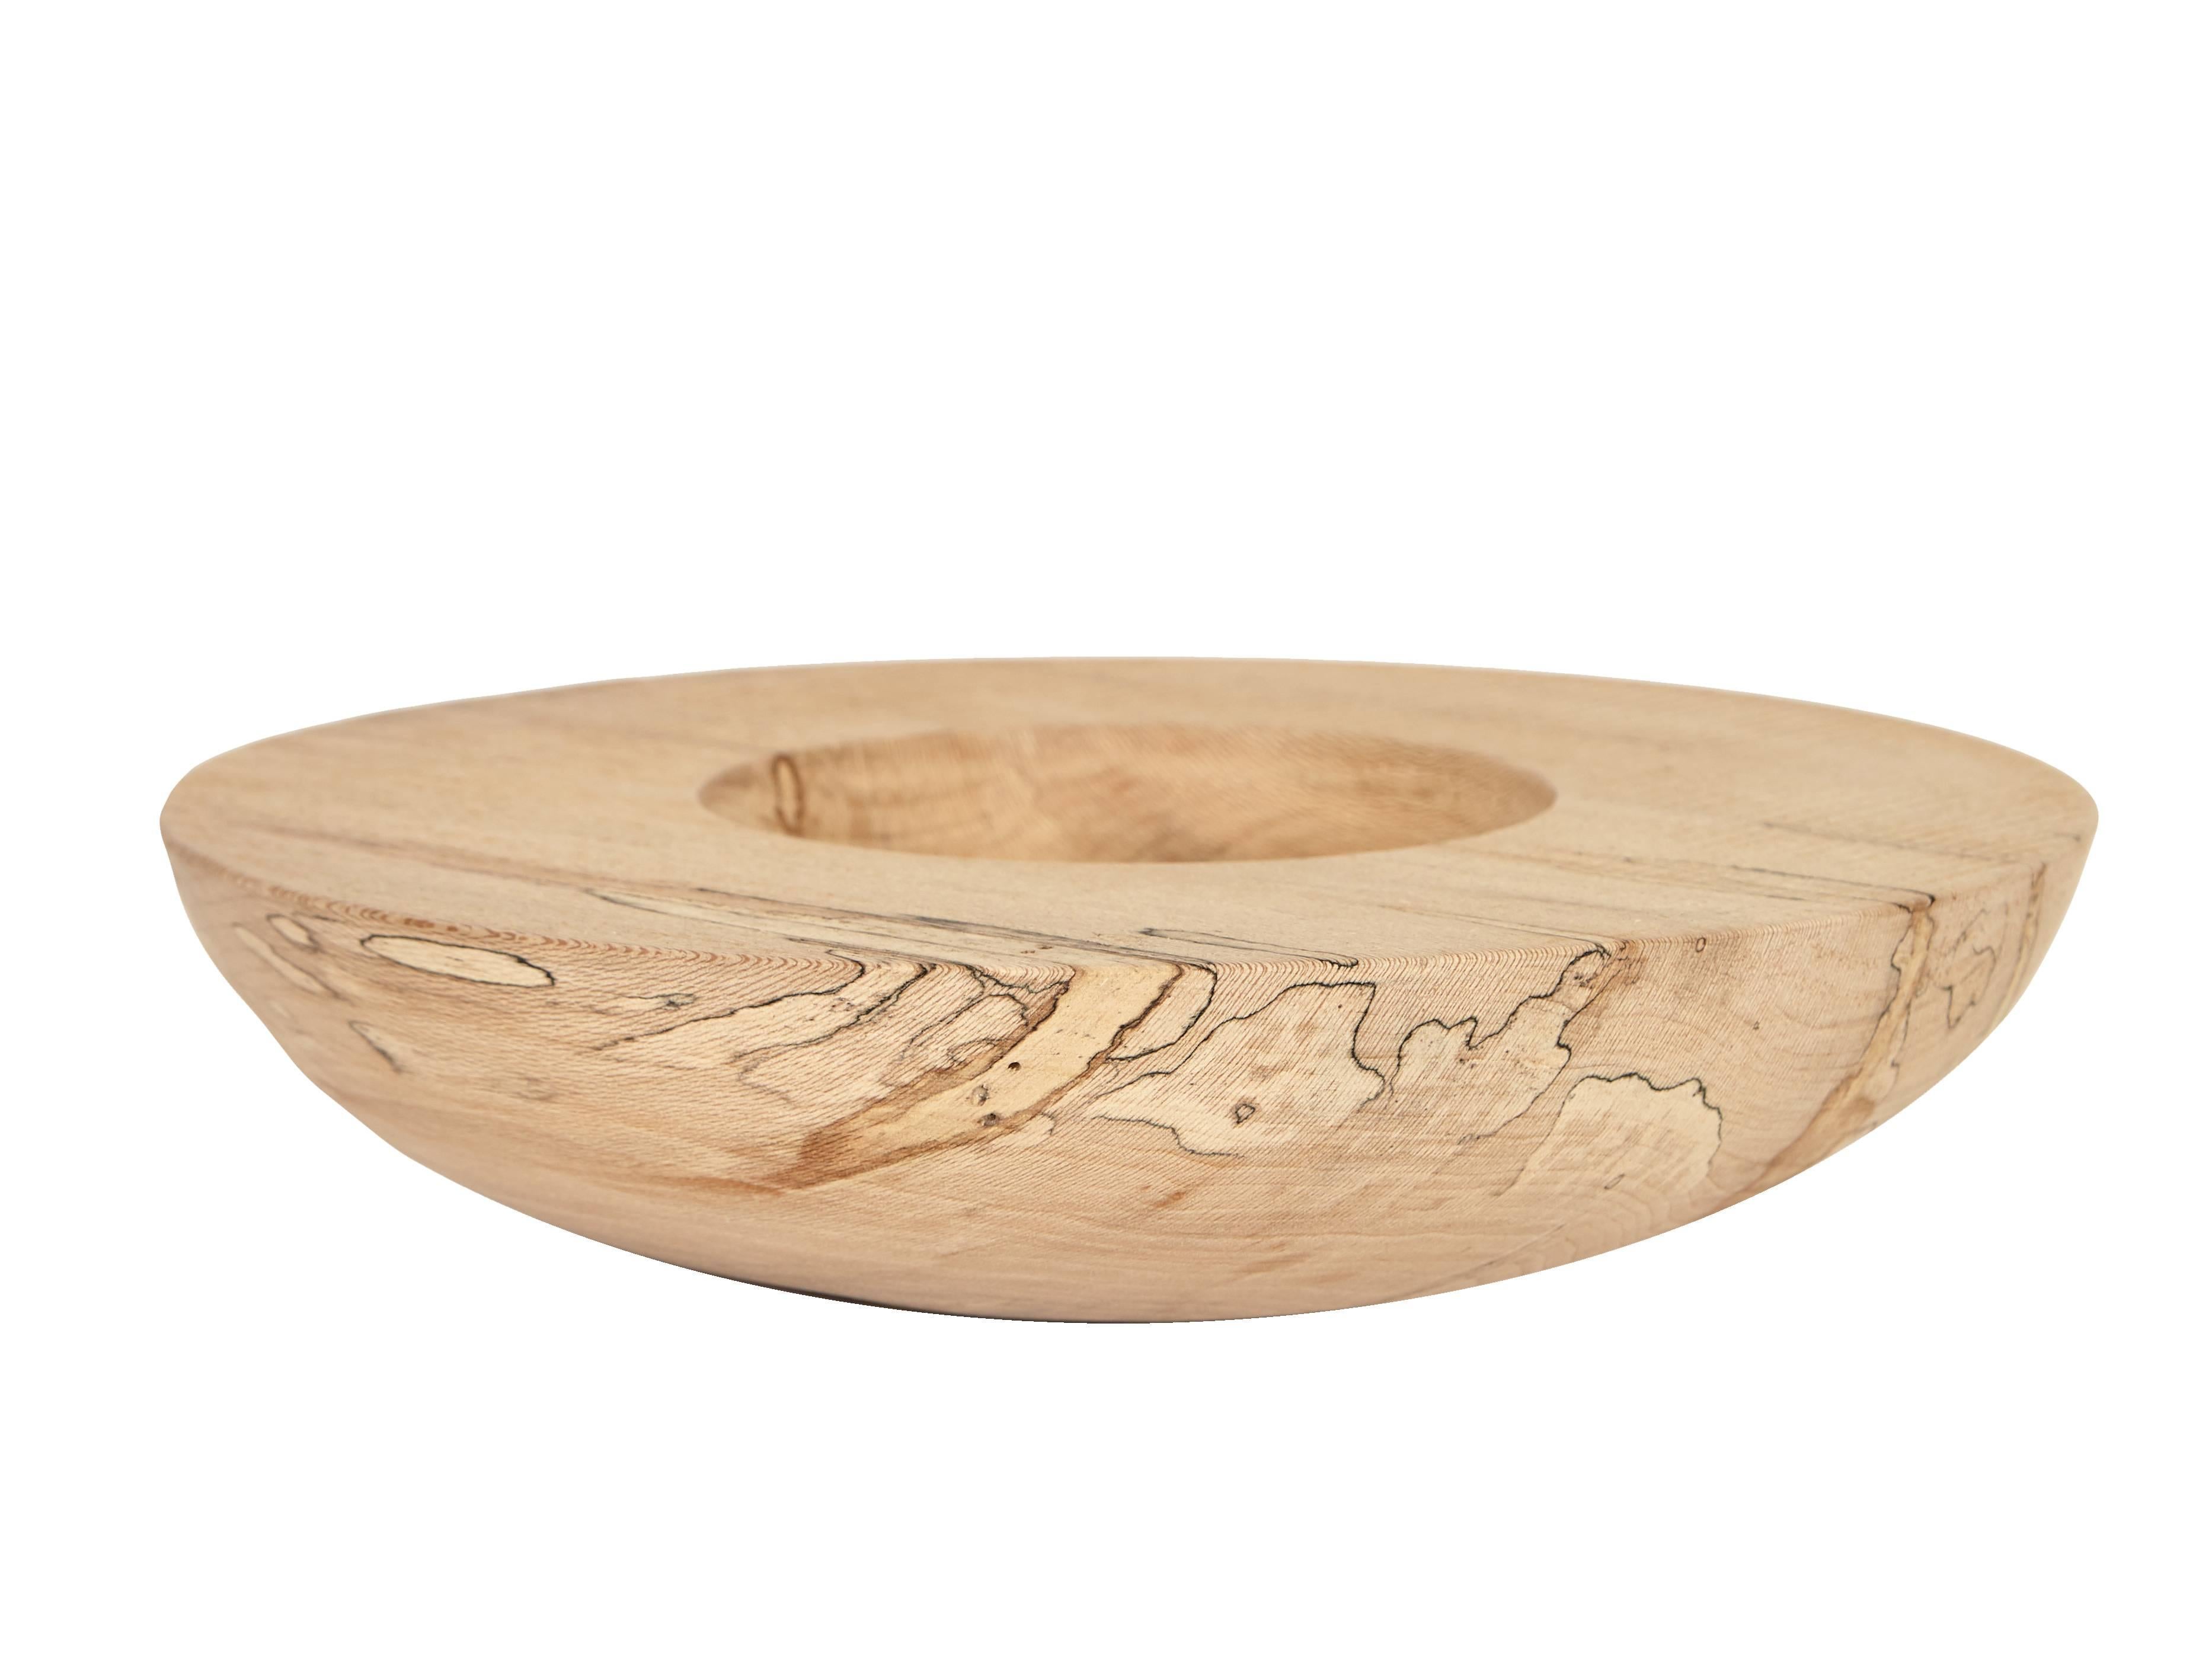 Core Series Sycamore bowl by Claudio Sebastian Stalling lathe turned and hand finished.

Originally from the German Alps, and trained in the traditional woodworking mastery of the German lineages, Claudio Sebastian Stalling's work is a synthesis